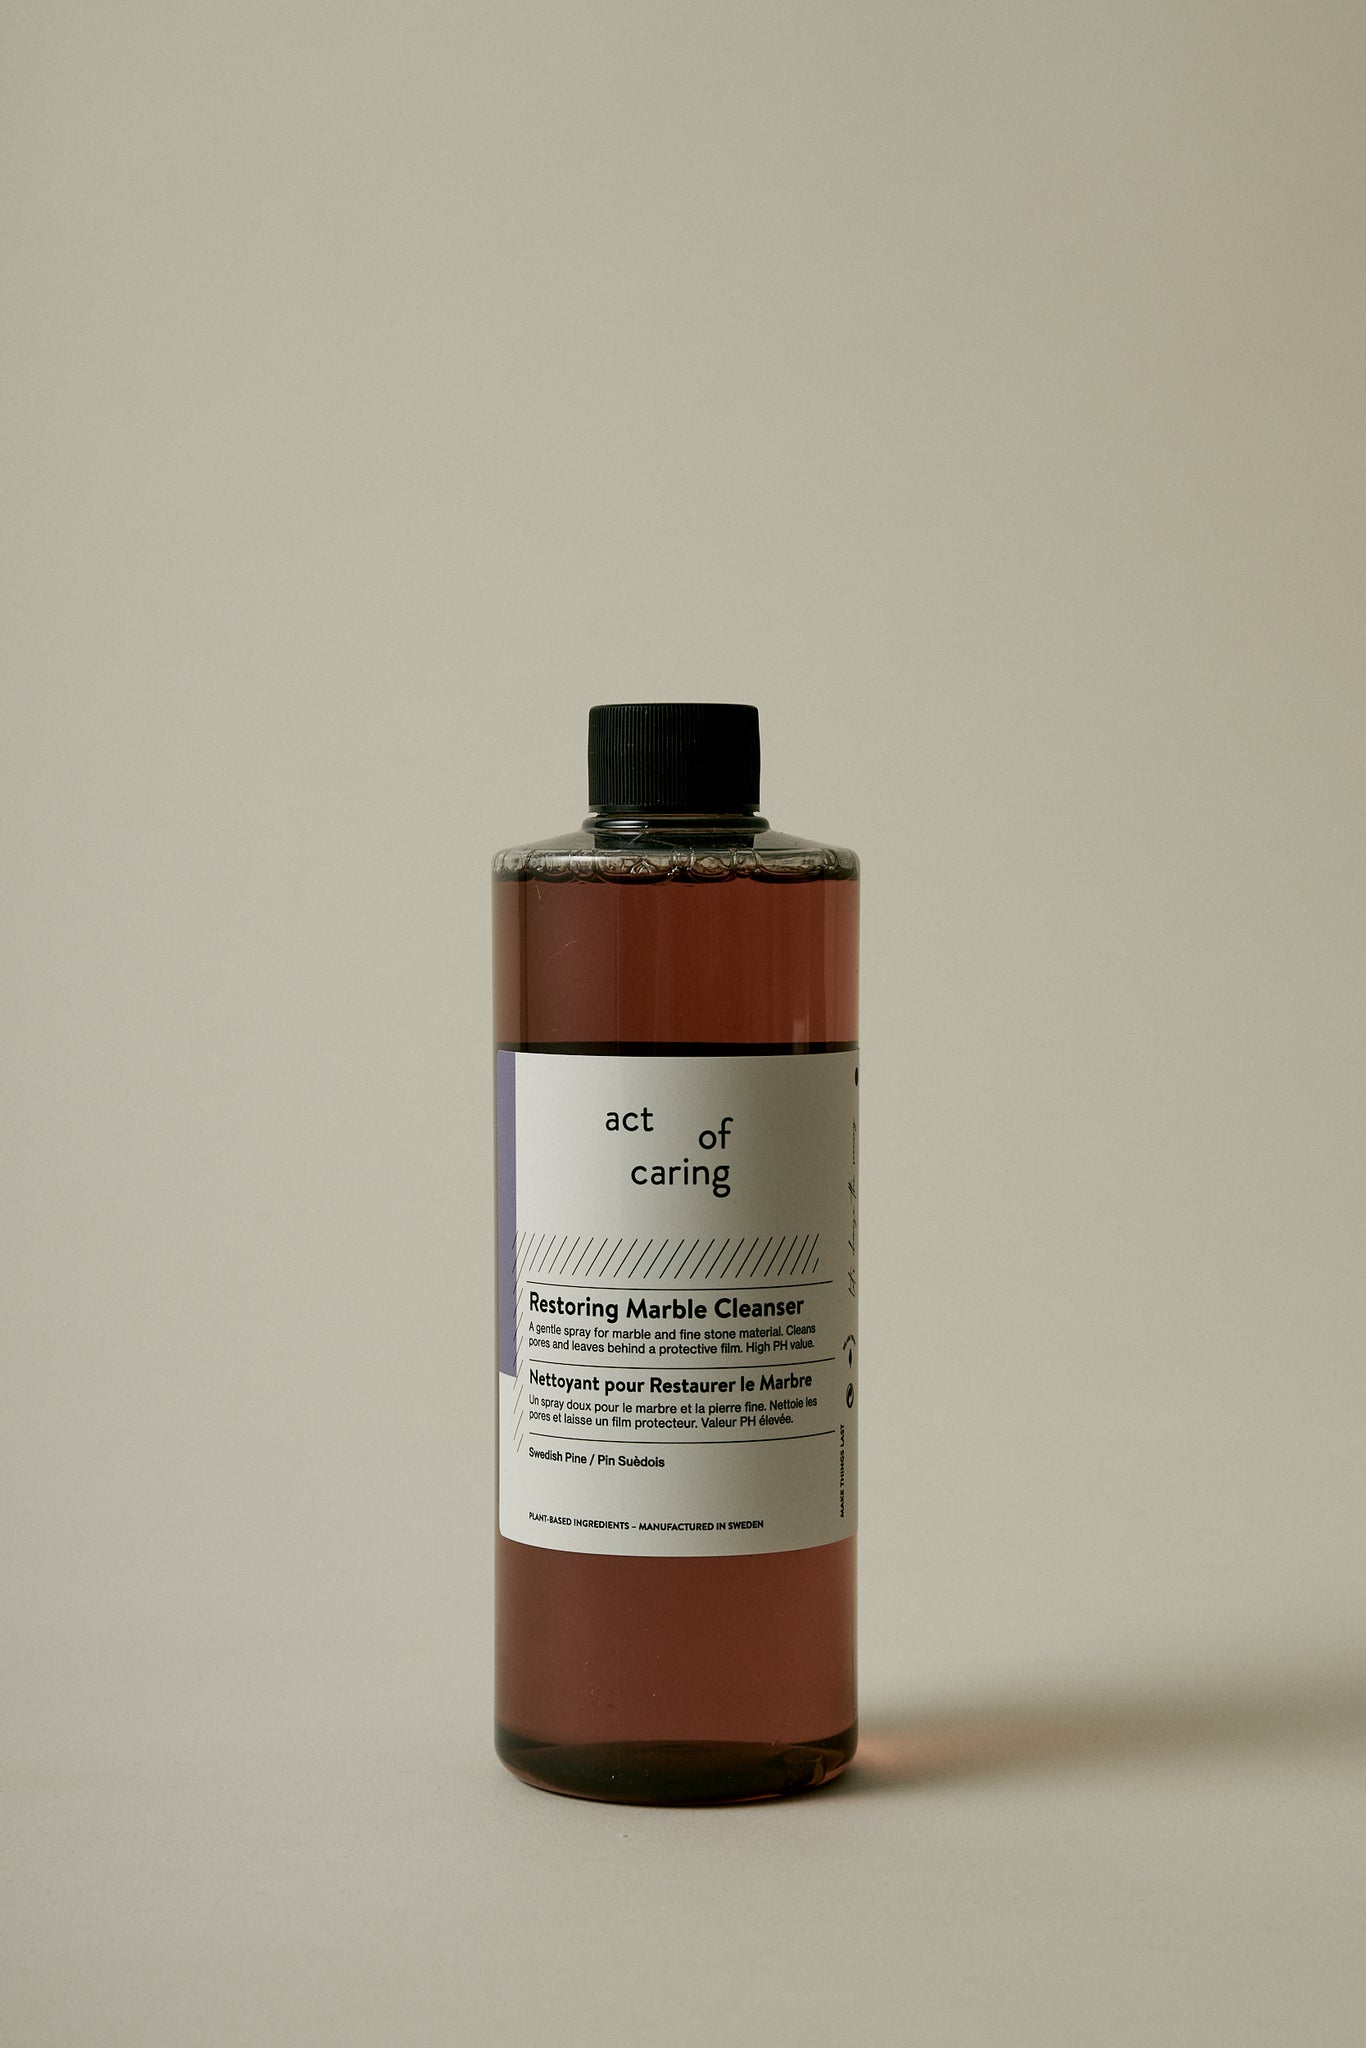 ACT OF CARING - Restoring Marble Cleanser Refill